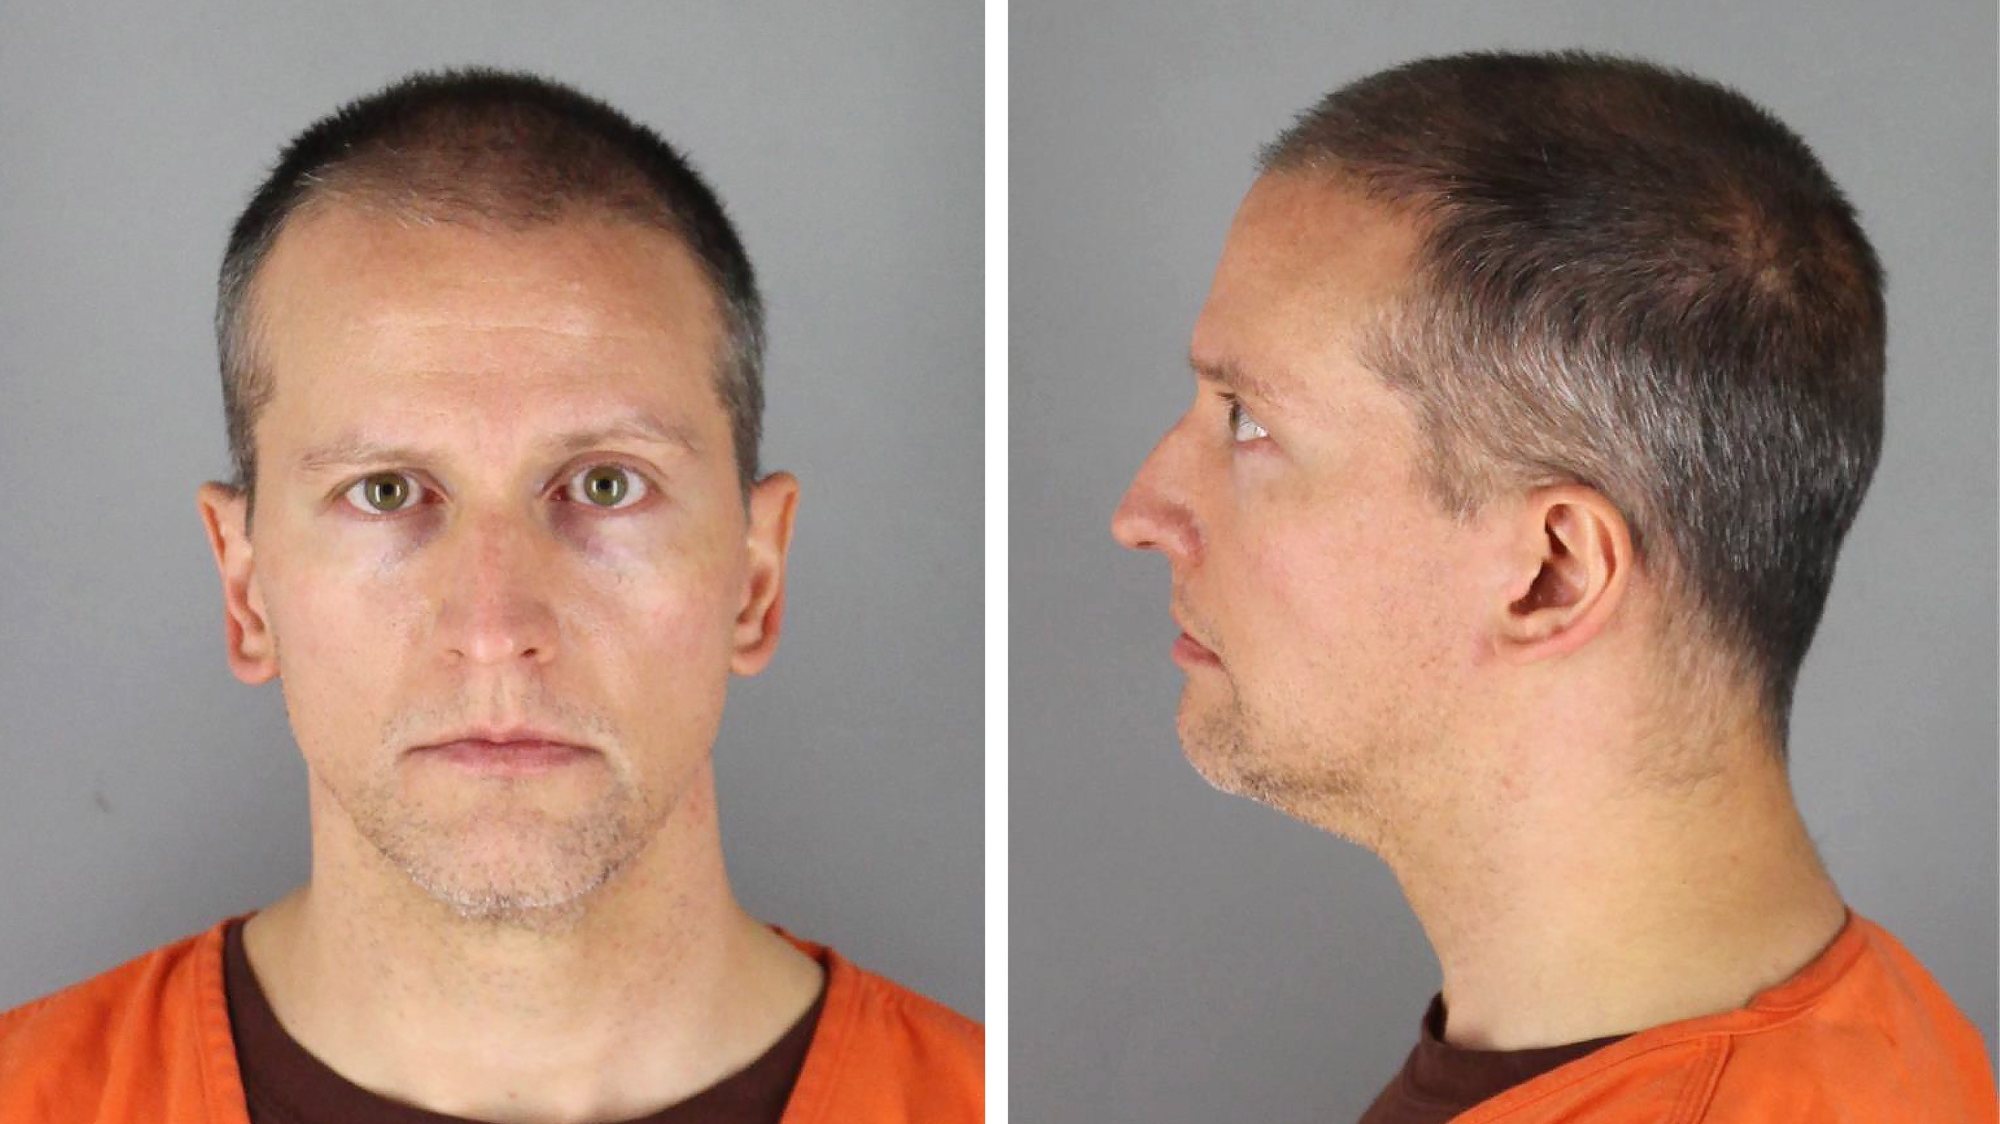 epa09148383 Handout booking photo released by the Hennepin County Sheriff&#039;s Office showing former Minneapolis Police Department Police Officer Derek Chauvin who was arrested and charged with second-degree murder, third-degree murder and second-degree manslaughter in the death of George Floyd in Minneapolis, Minnesota, USA, 12 June 2020 (reissued 20 April 2021). Former Minneapolis police officer Derek Chauvin was found guilty on all counts in the death of George Floyd on 20 April 2021.  EPA/HENNEPIN COUNTY SHERIFF / HANDOUT  HANDOUT EDITORIAL USE ONLY/NO SALES *** Local Caption *** 56147358